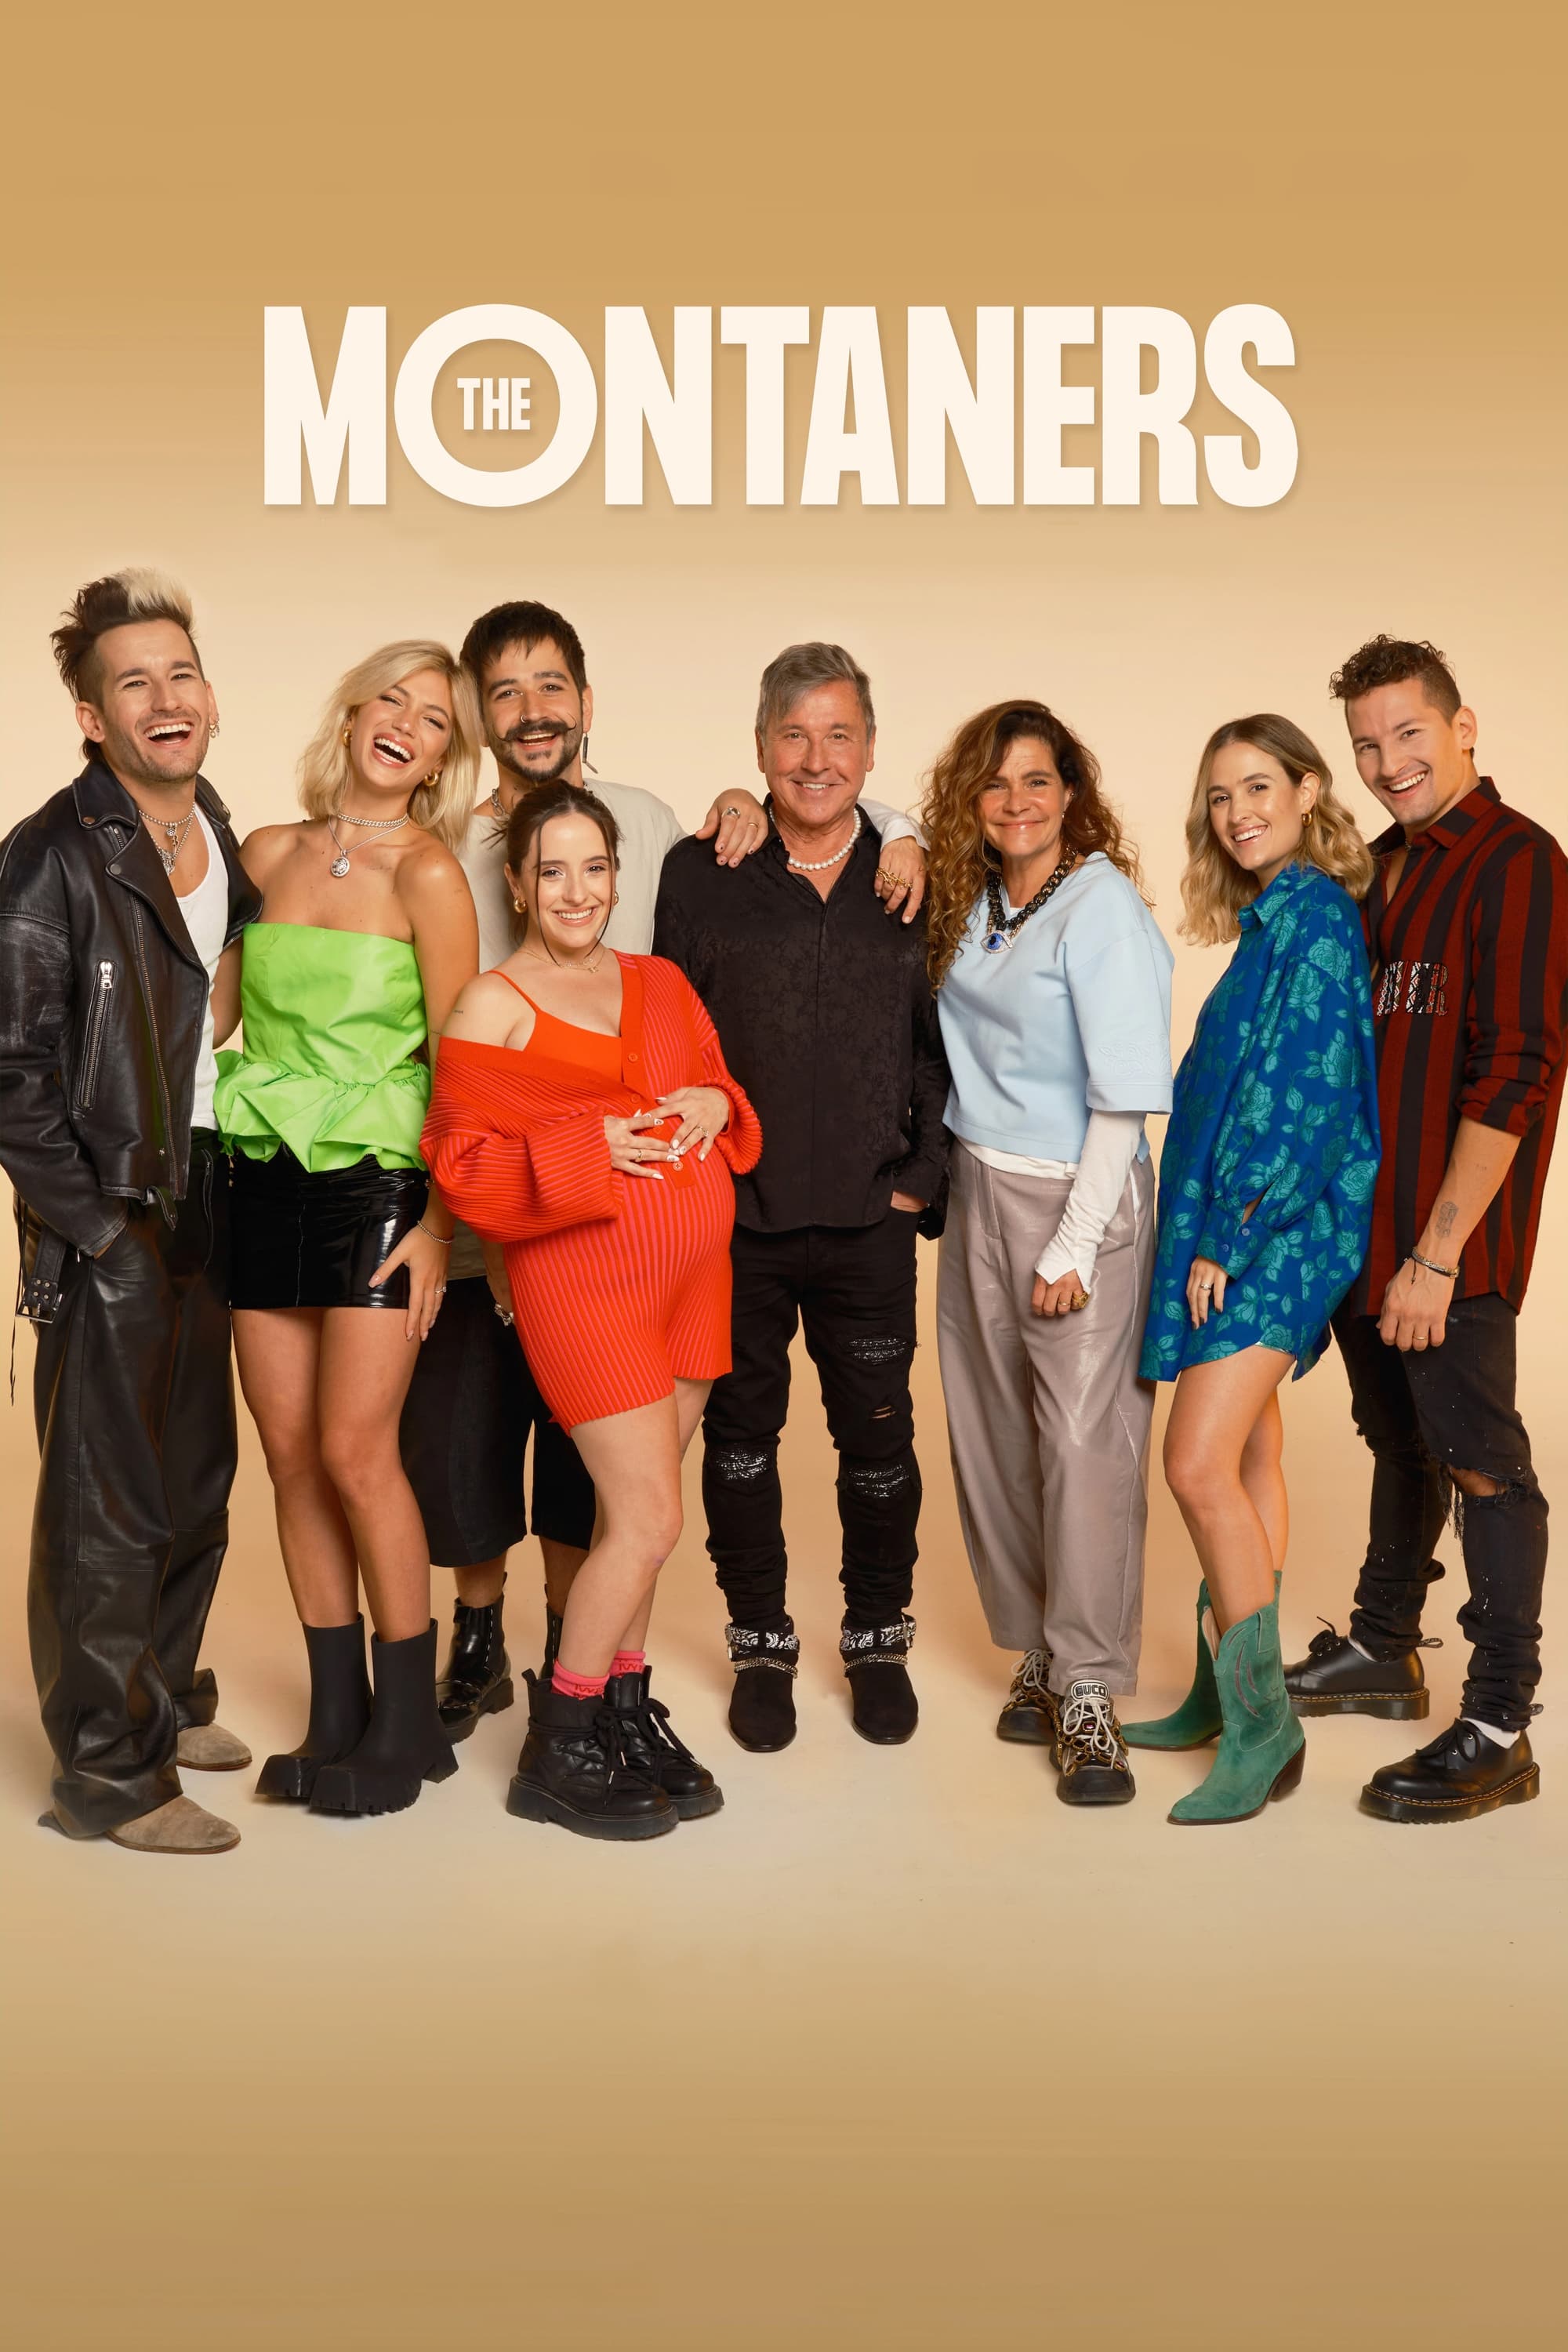 TV ratings for The Montaners (Los Montaner) in Suecia. Disney+ TV series